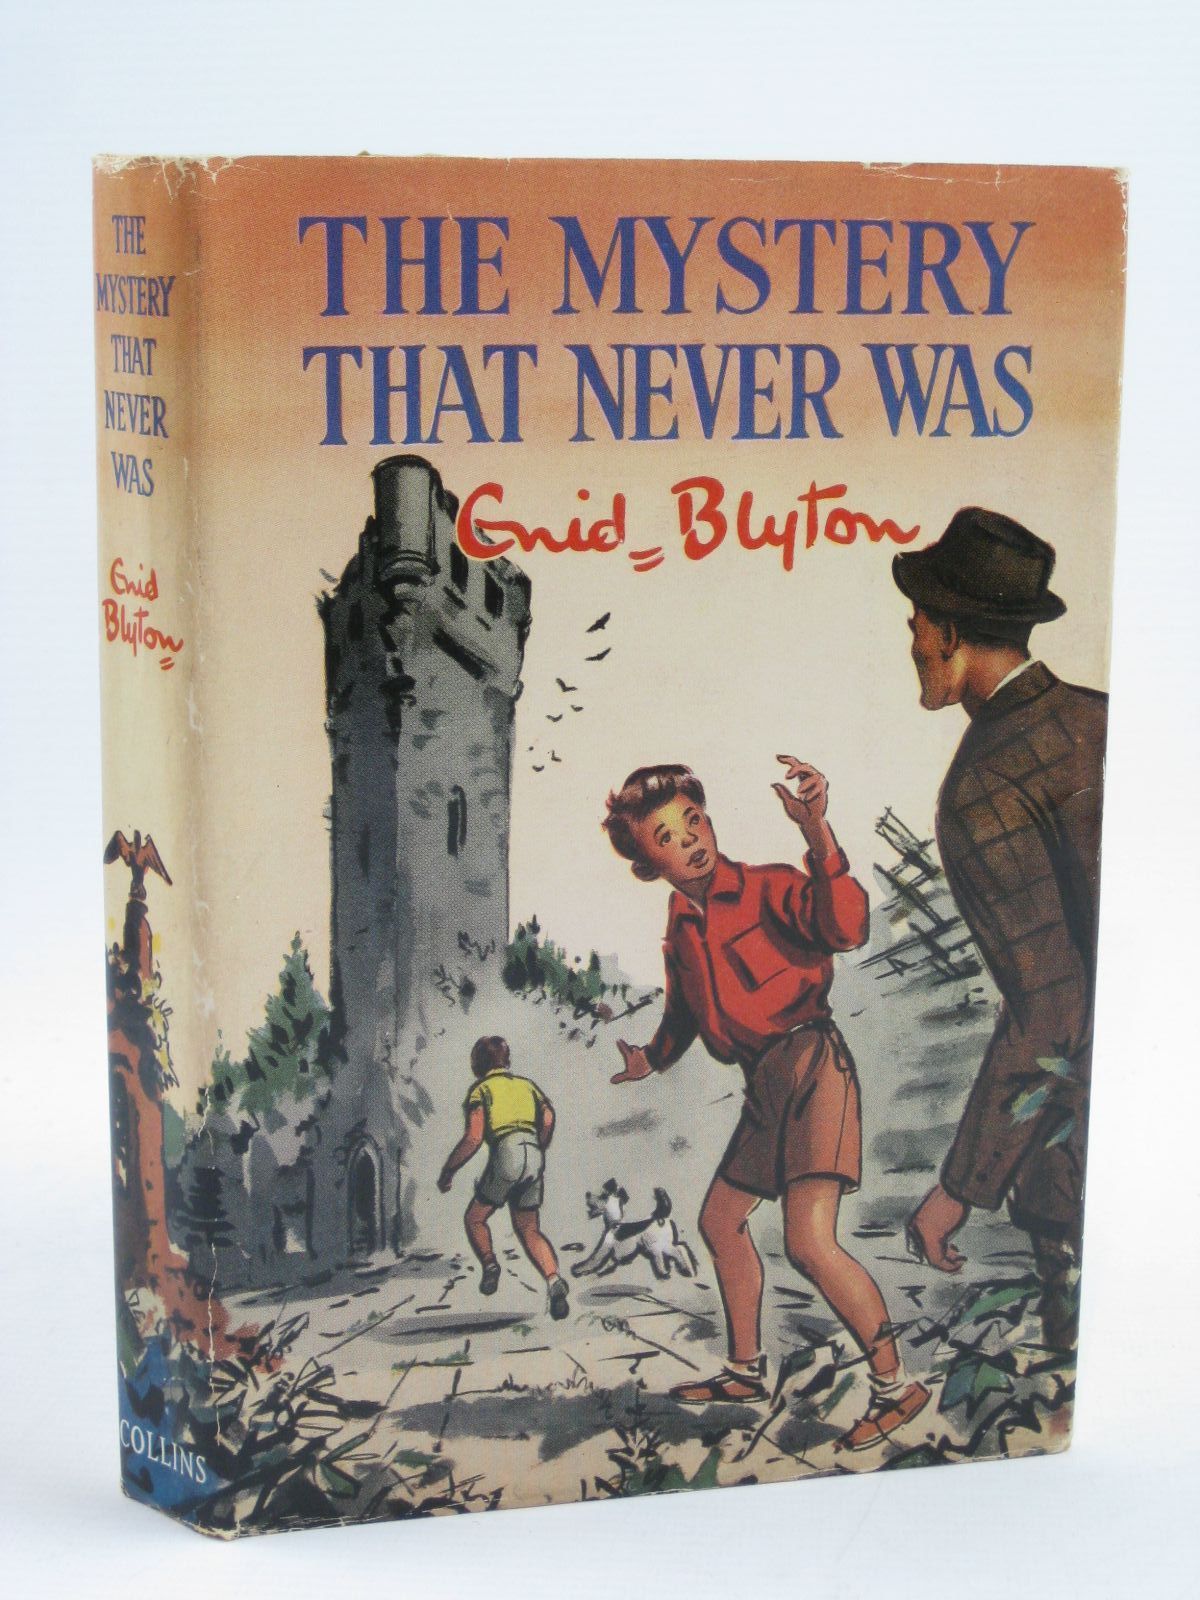 Cover of THE MYSTERY THAT NEVER WAS by Enid Blyton